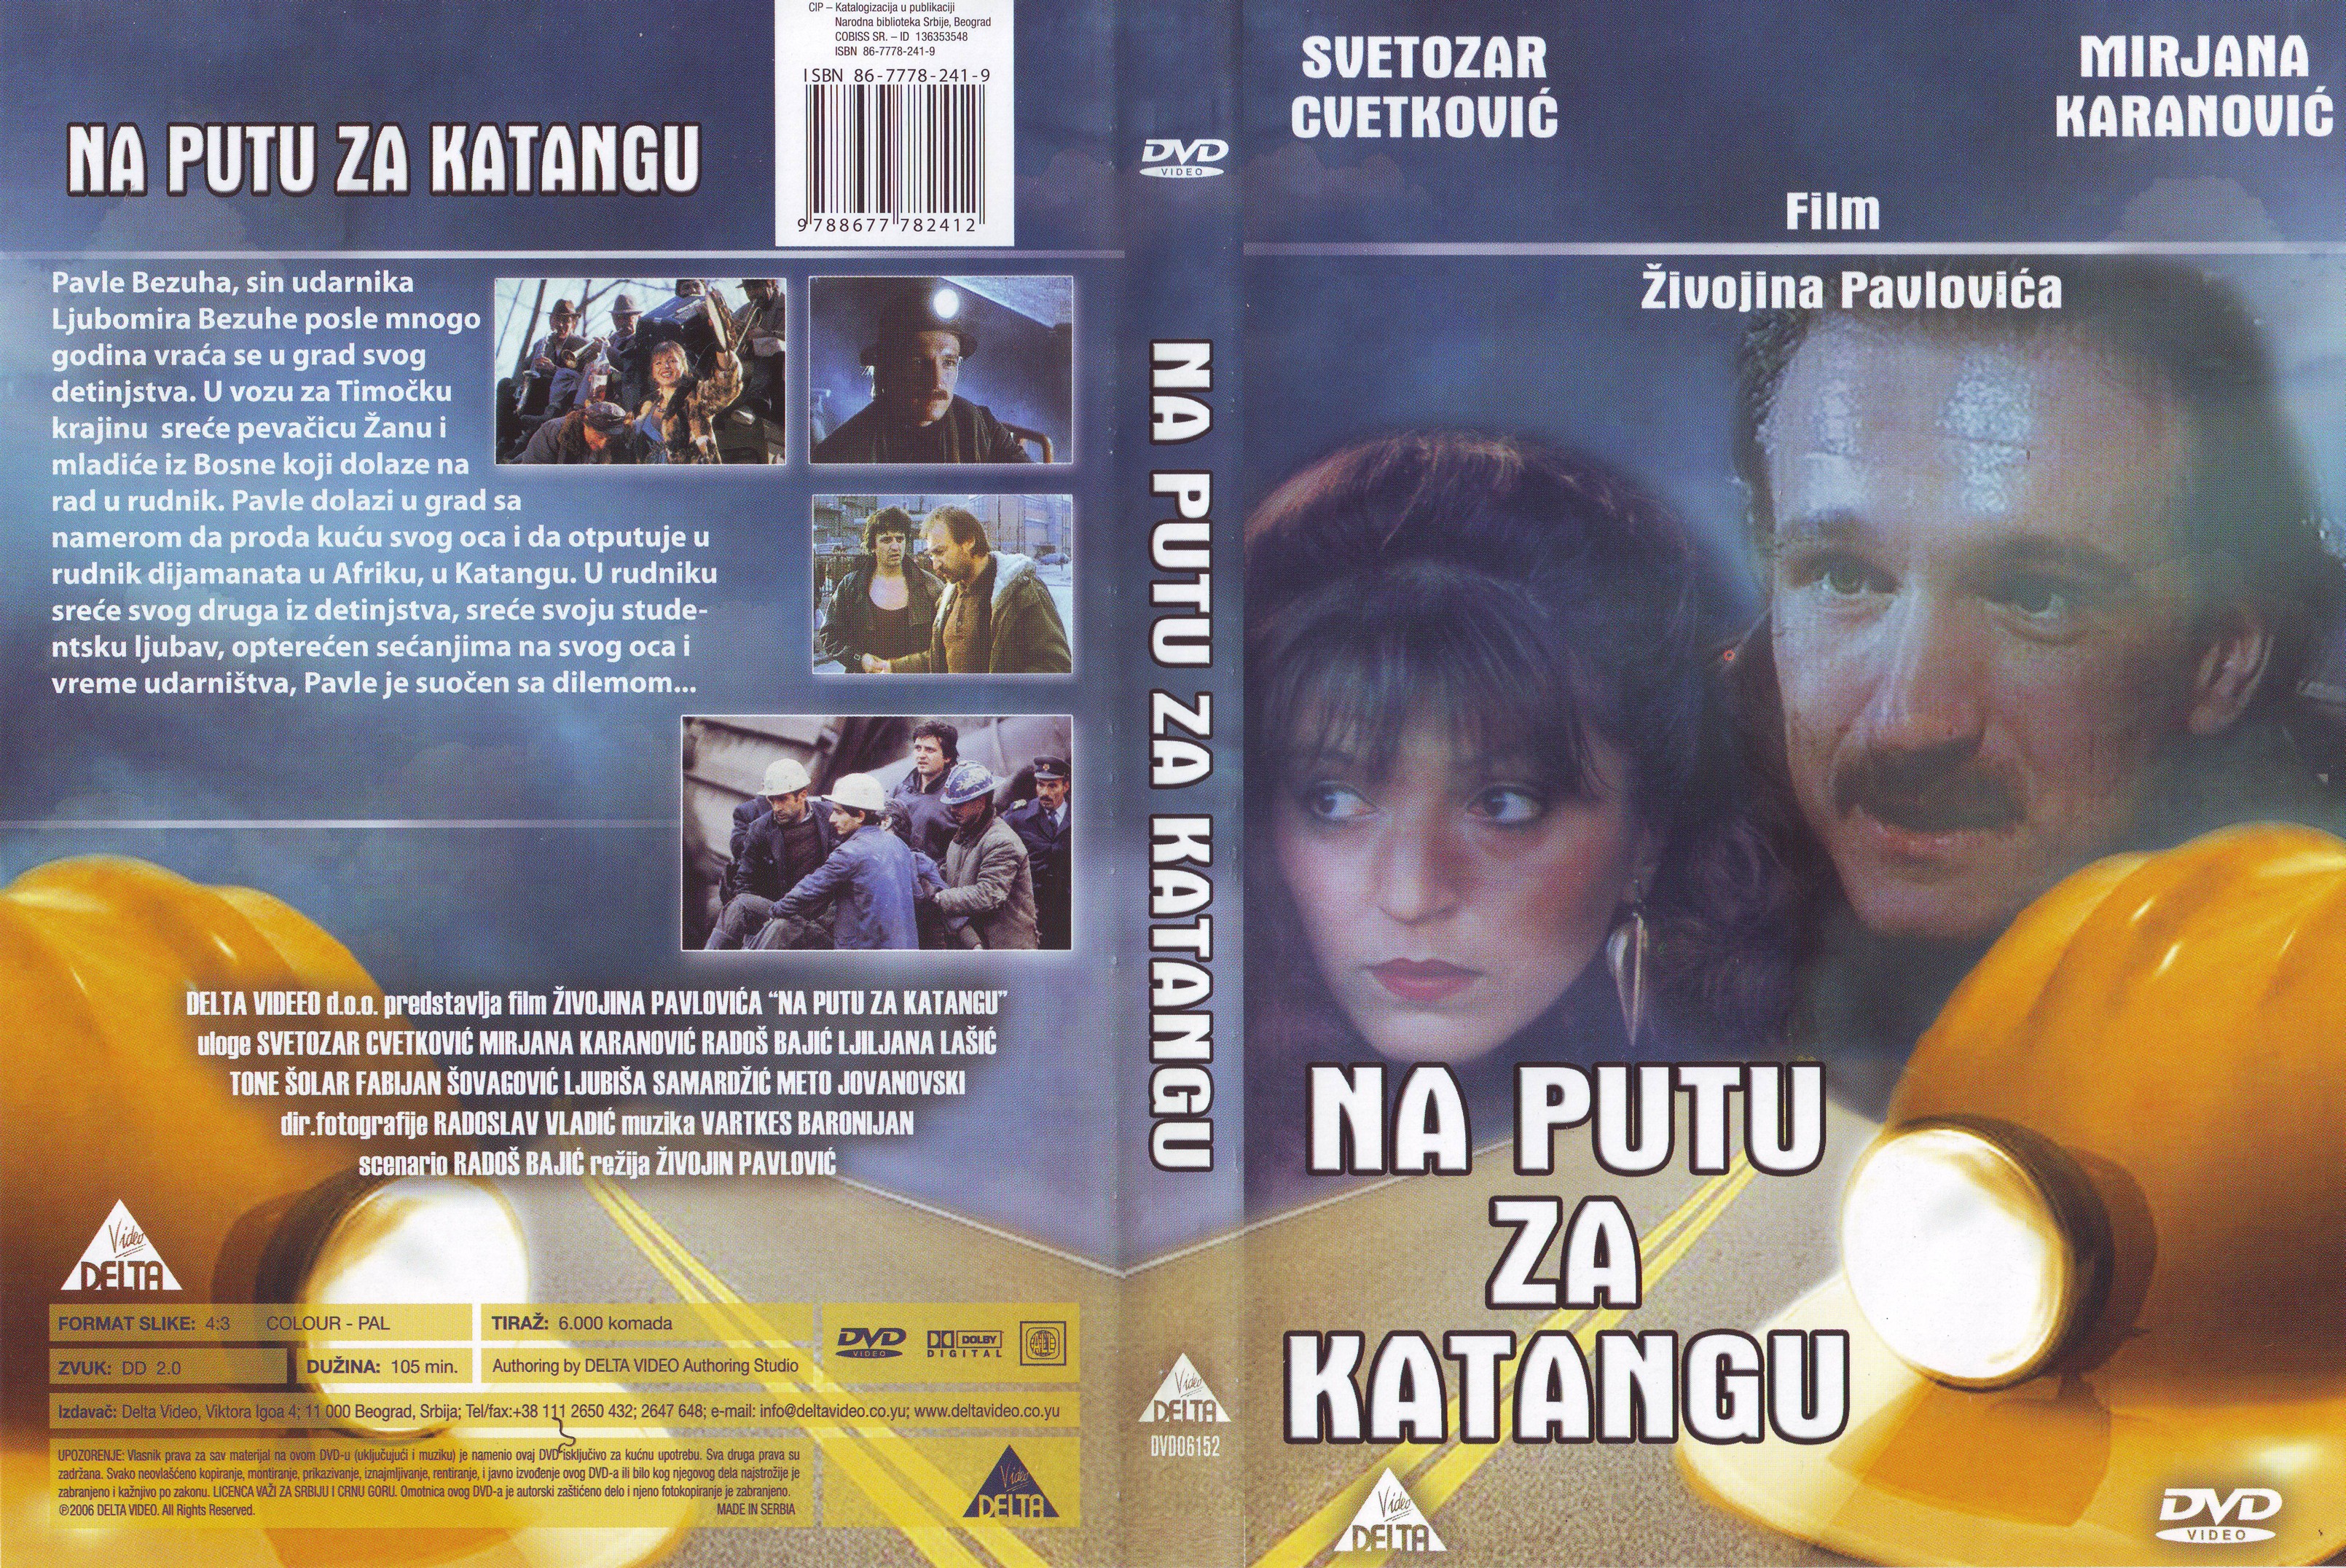 Click to view full size image -  DVD Cover - N - DVD - NAPUTU ZA KATANGU - DVD - NAPUTU ZA KATANGU.jpg